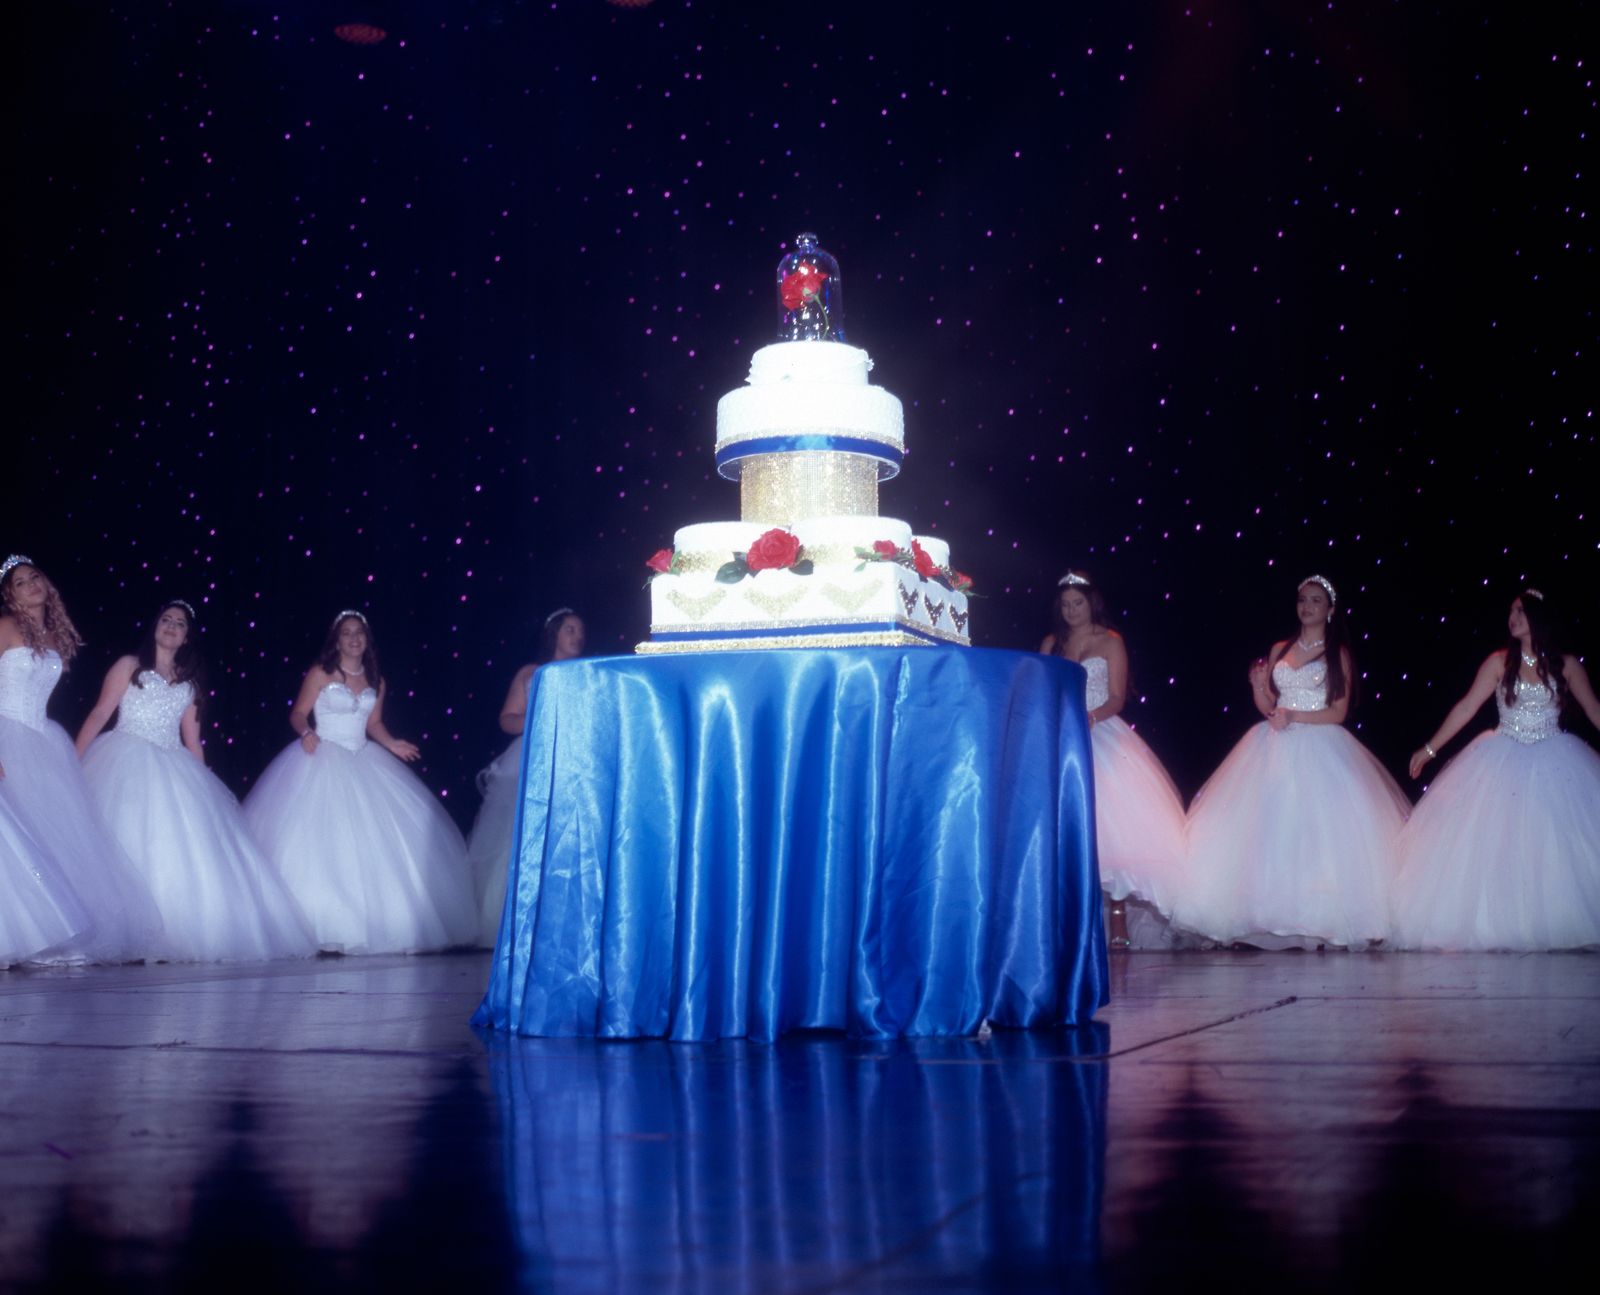 © Samantha Cabrera Friend - A surprise cake for the quinceañeras arrises from beneath the stage.